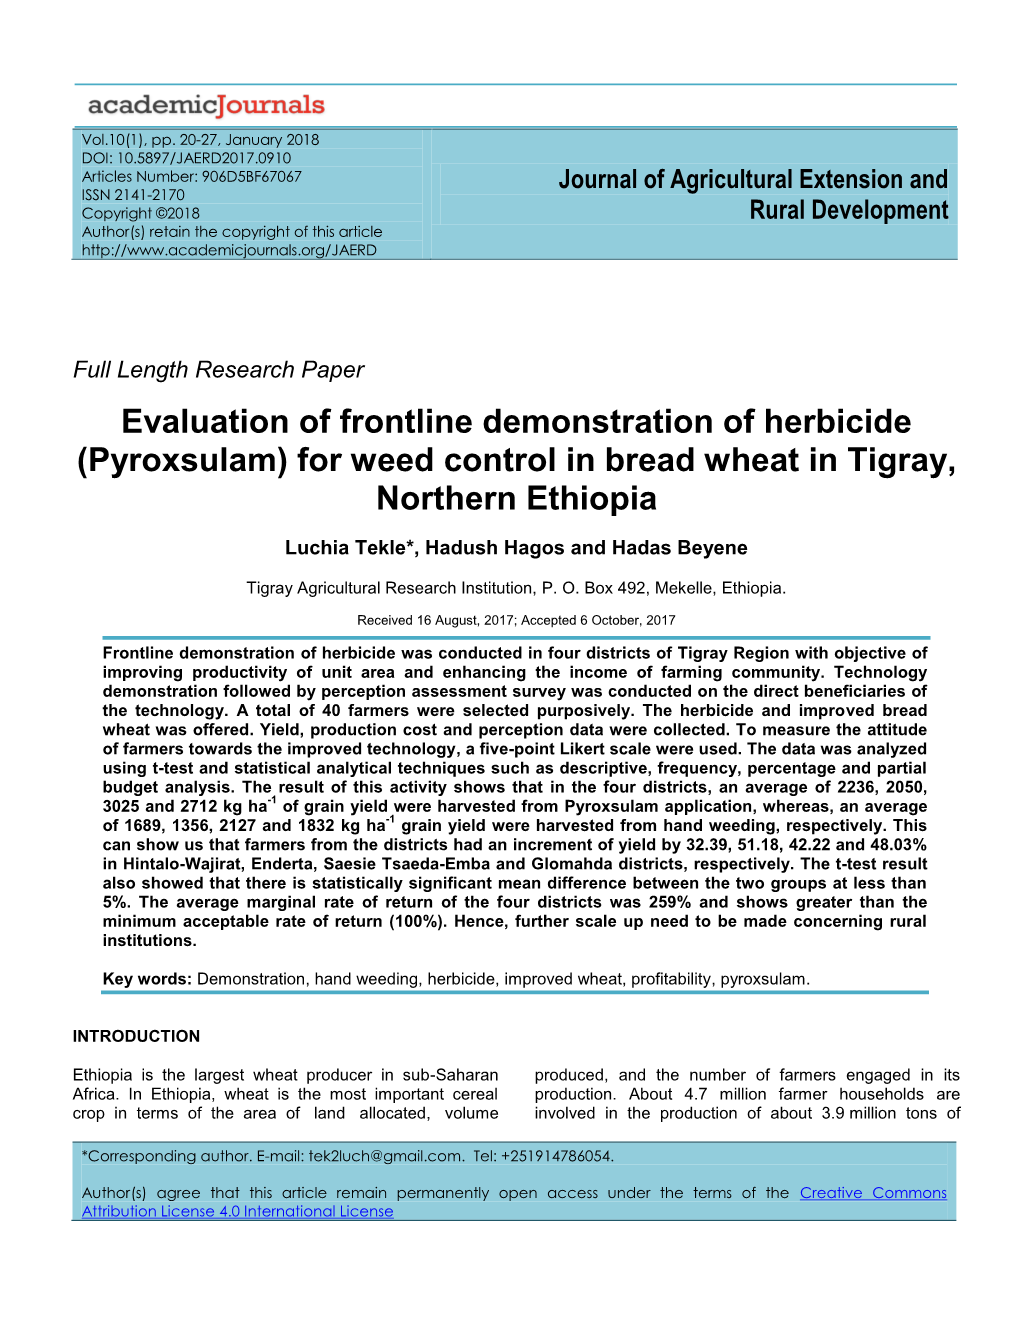 Evaluation of Frontline Demonstration of Herbicide (Pyroxsulam) for Weed Control in Bread Wheat in Tigray, Northern Ethiopia